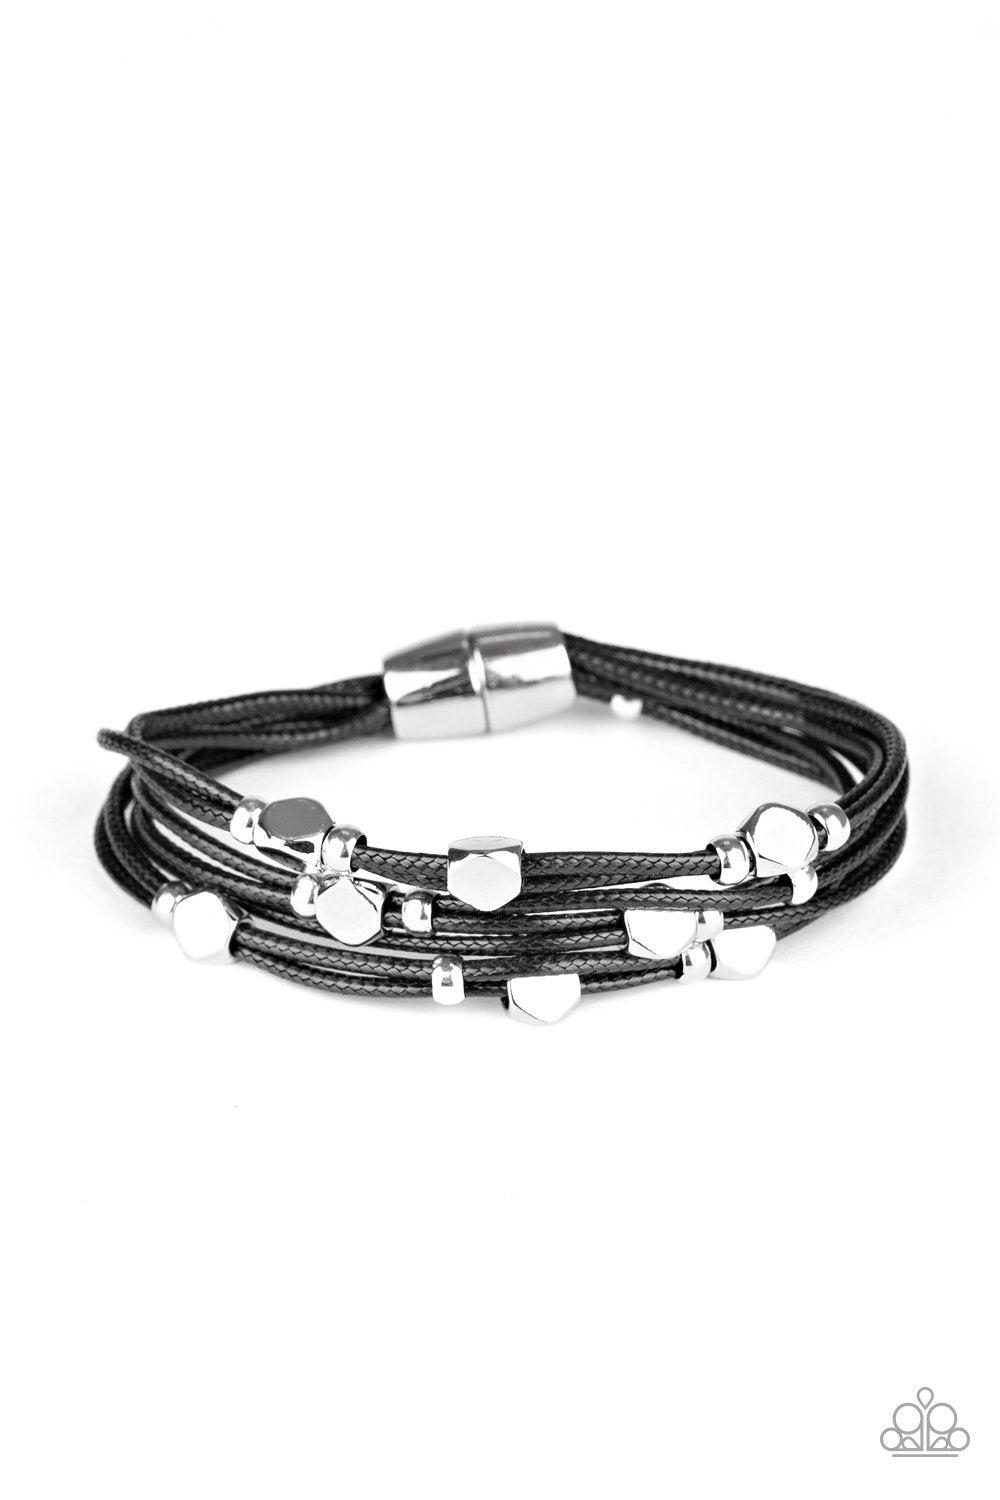 Cut The Cord Black and Silver Bracelet - Paparazzi Accessories-CarasShop.com - $5 Jewelry by Cara Jewels